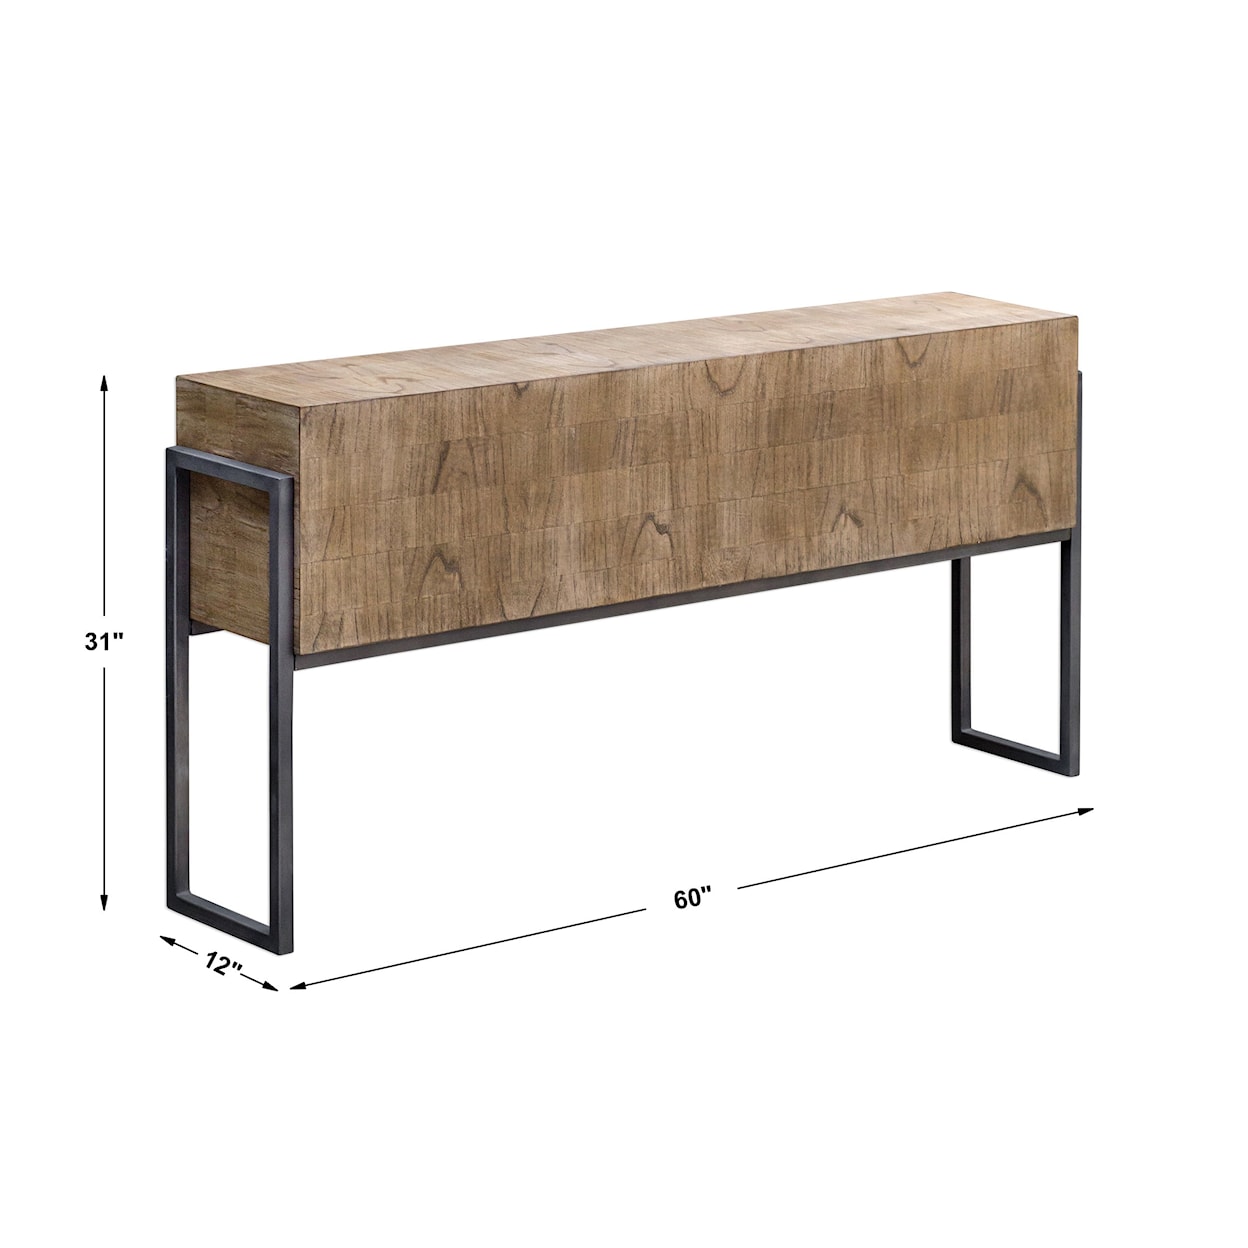 Uttermost Accent Furniture - Occasional Tables Nevis Contemporary Sofa Table